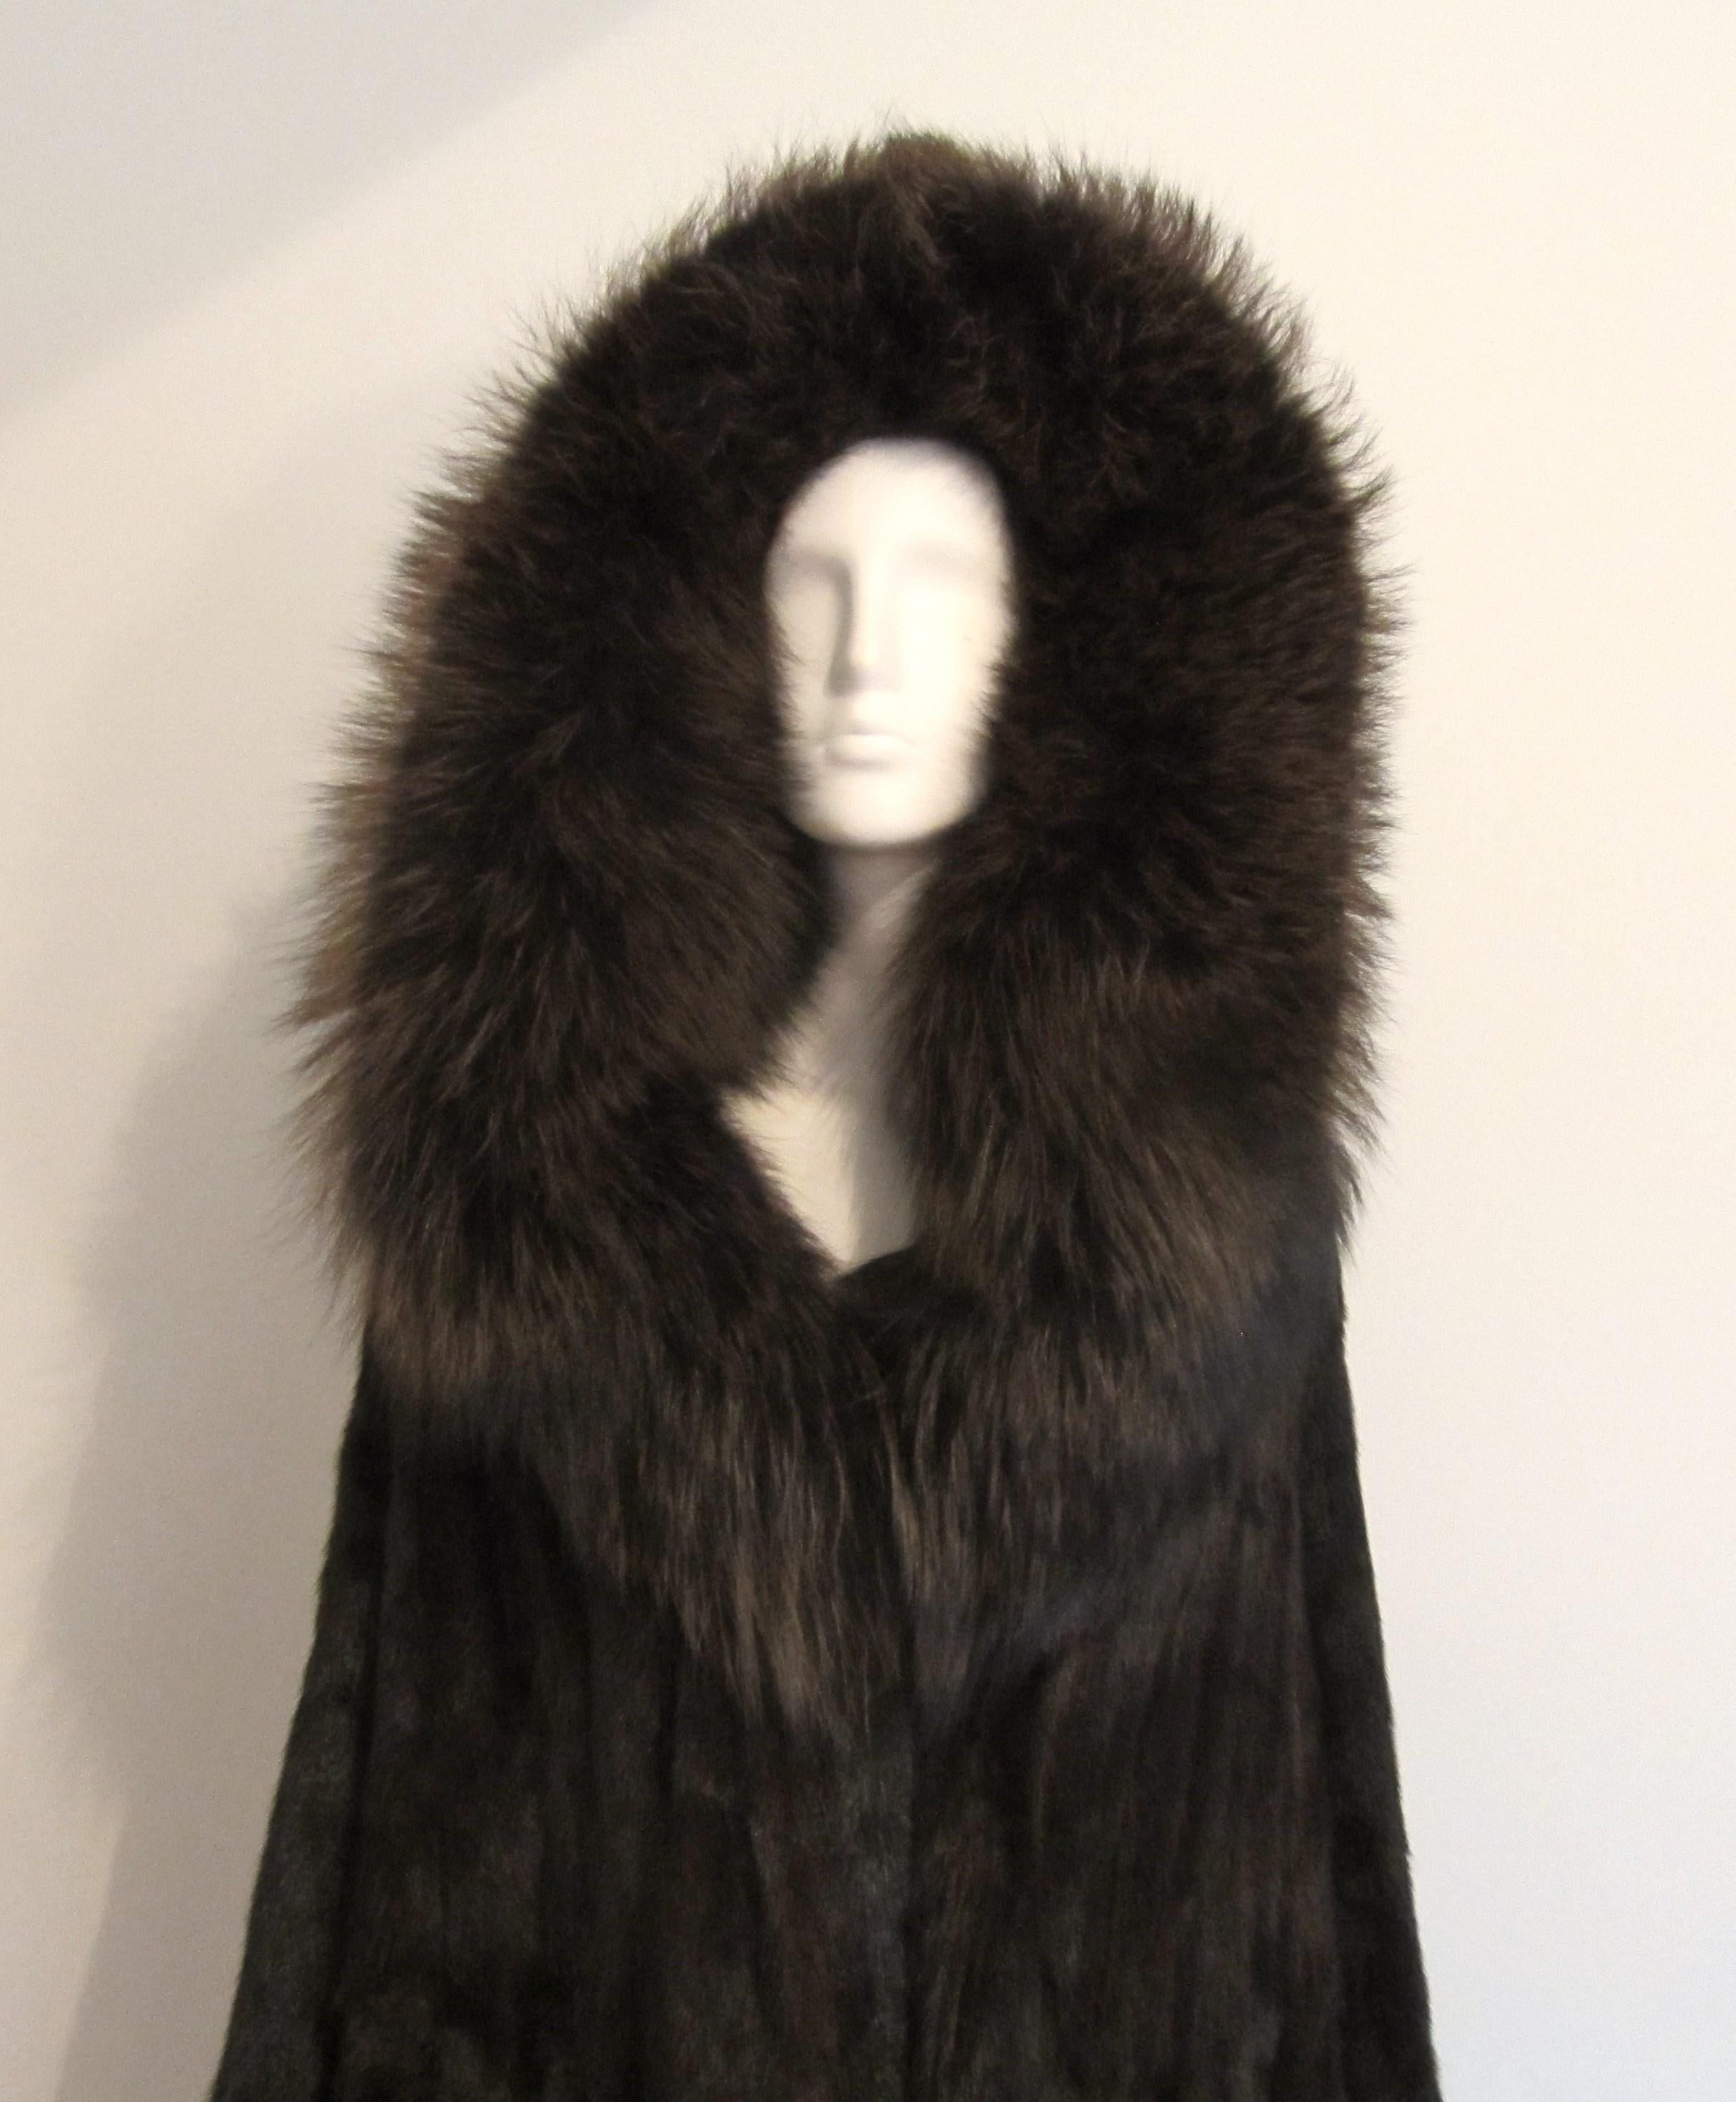 Fabulous deep dark Mink Jacket with Over sized Fox collar hood. This is a wonderful jacket. Soft and supple fur. 3 clip closure, 2 slit pockets, fully lined. Will fit a L - XL, but please refer to the measurements- up to 46in. bust- up to 50in.